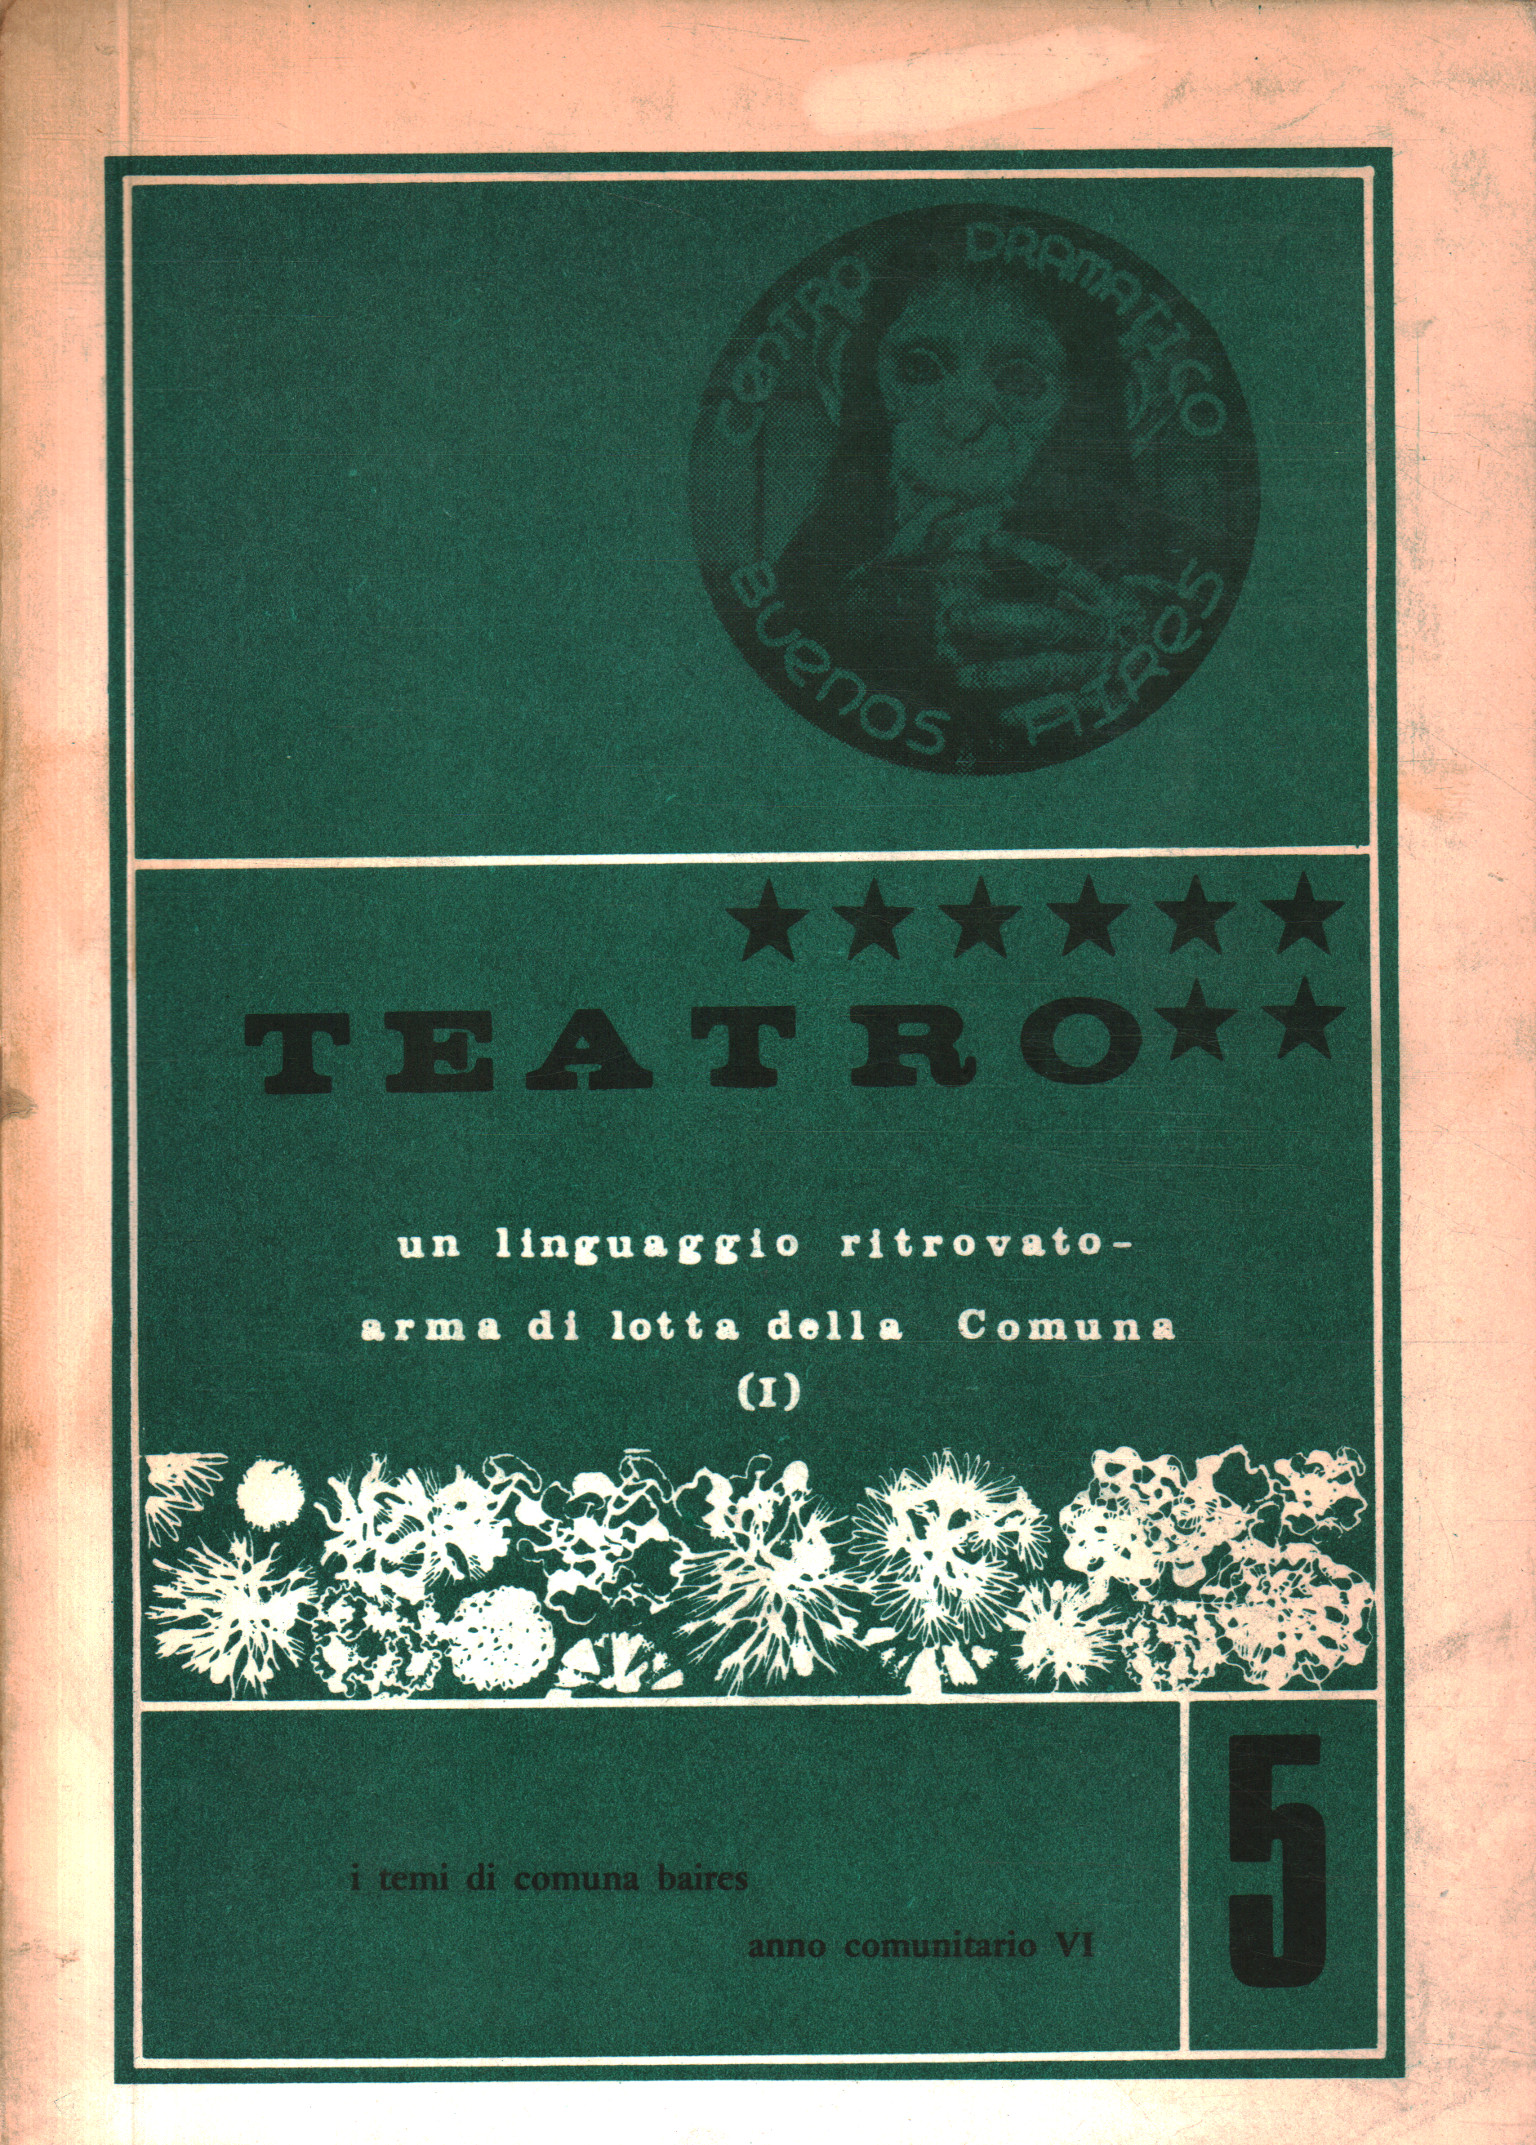 Theater. A Rediscovered Language - Weapon% 2